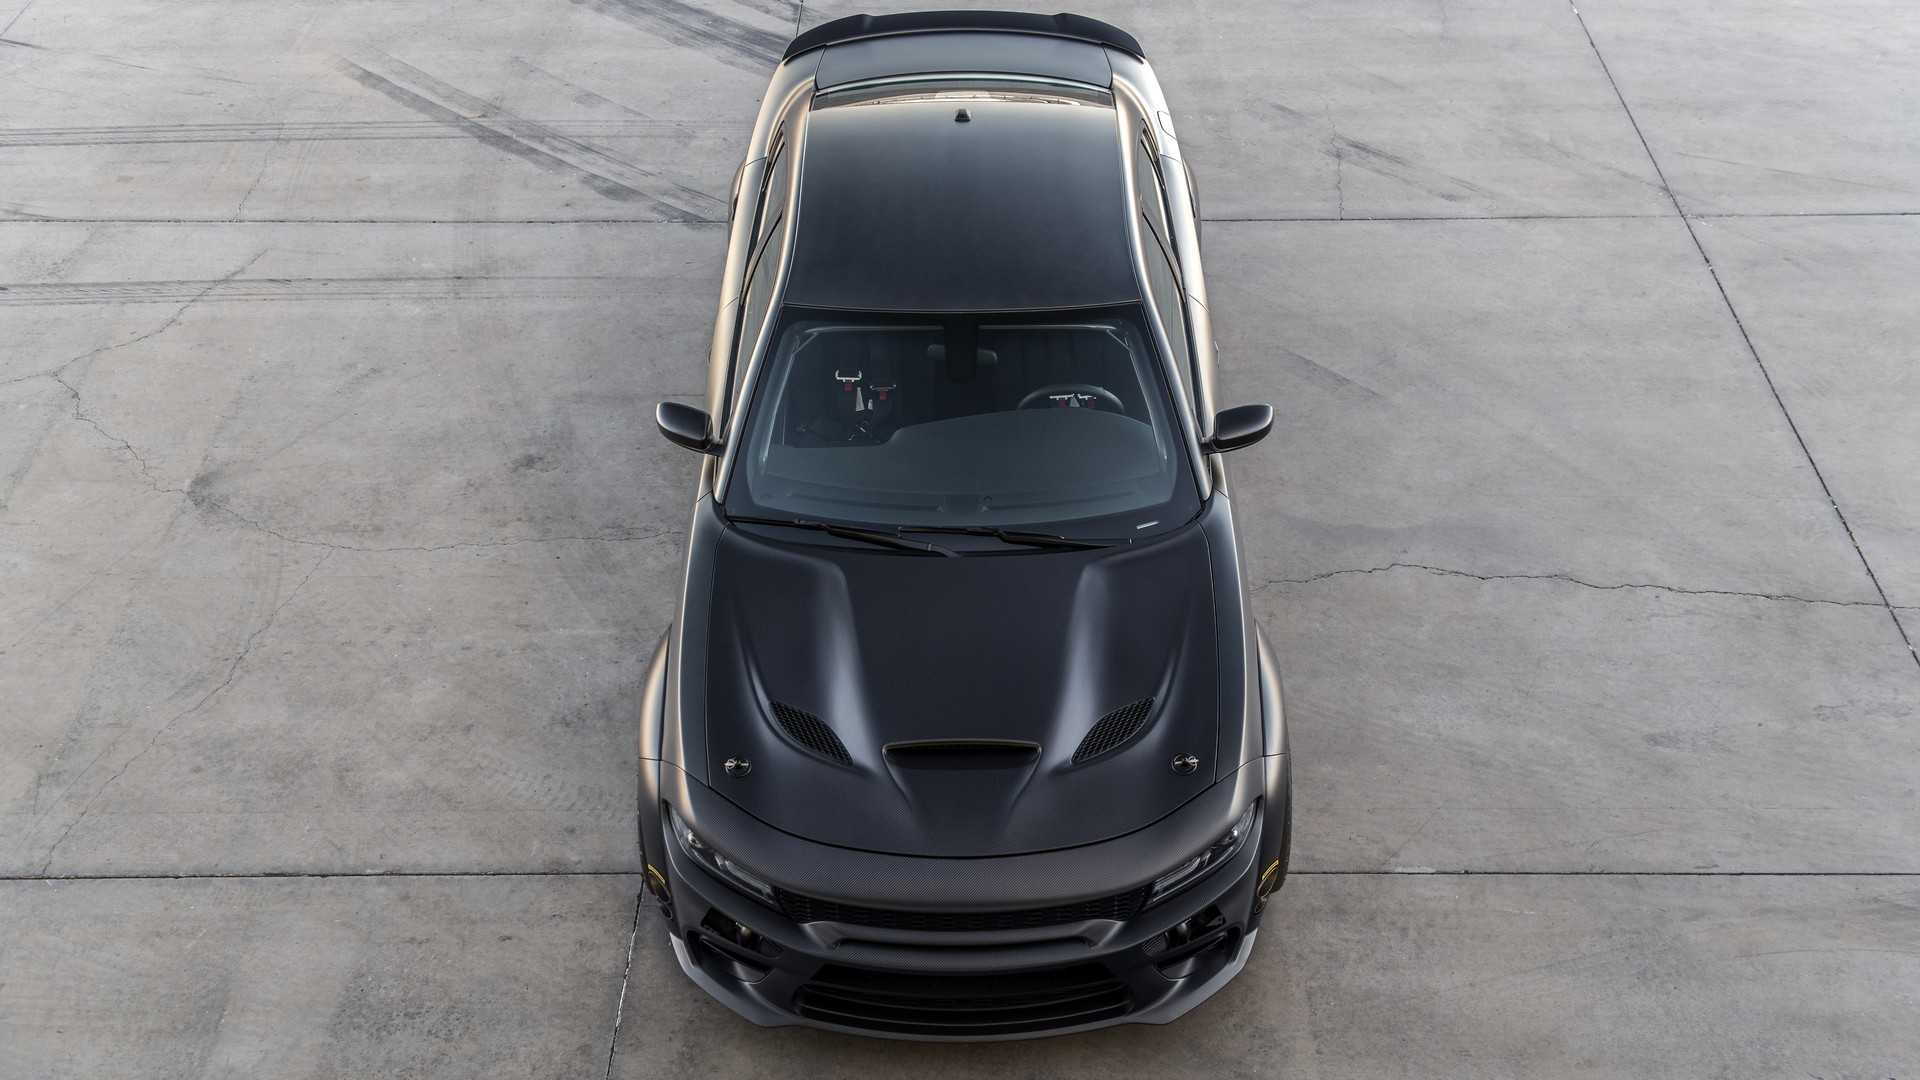 2020 Dodge Charger SRT Hellcat Widebody by SpeedKore Performance Group